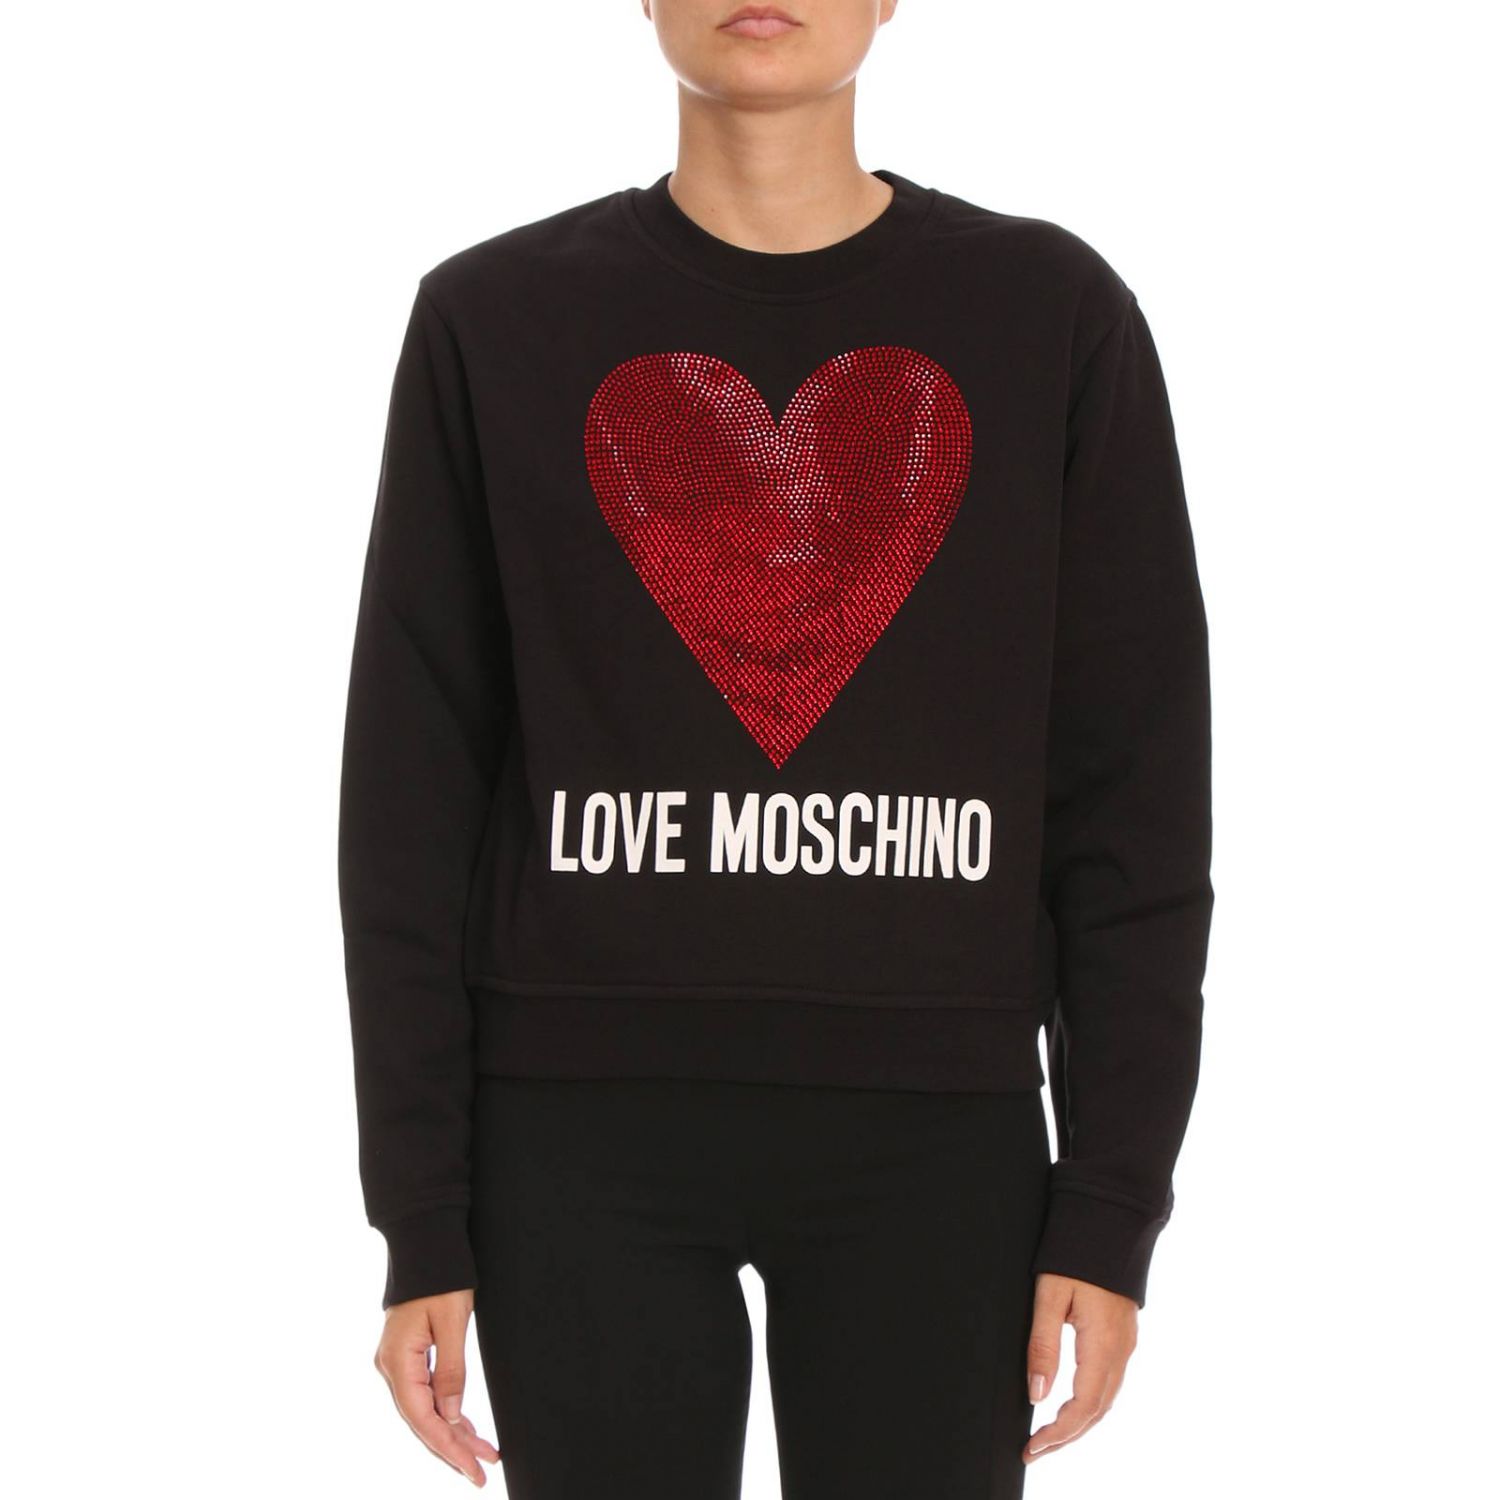 Love Moschino Outlet: Sweater women 